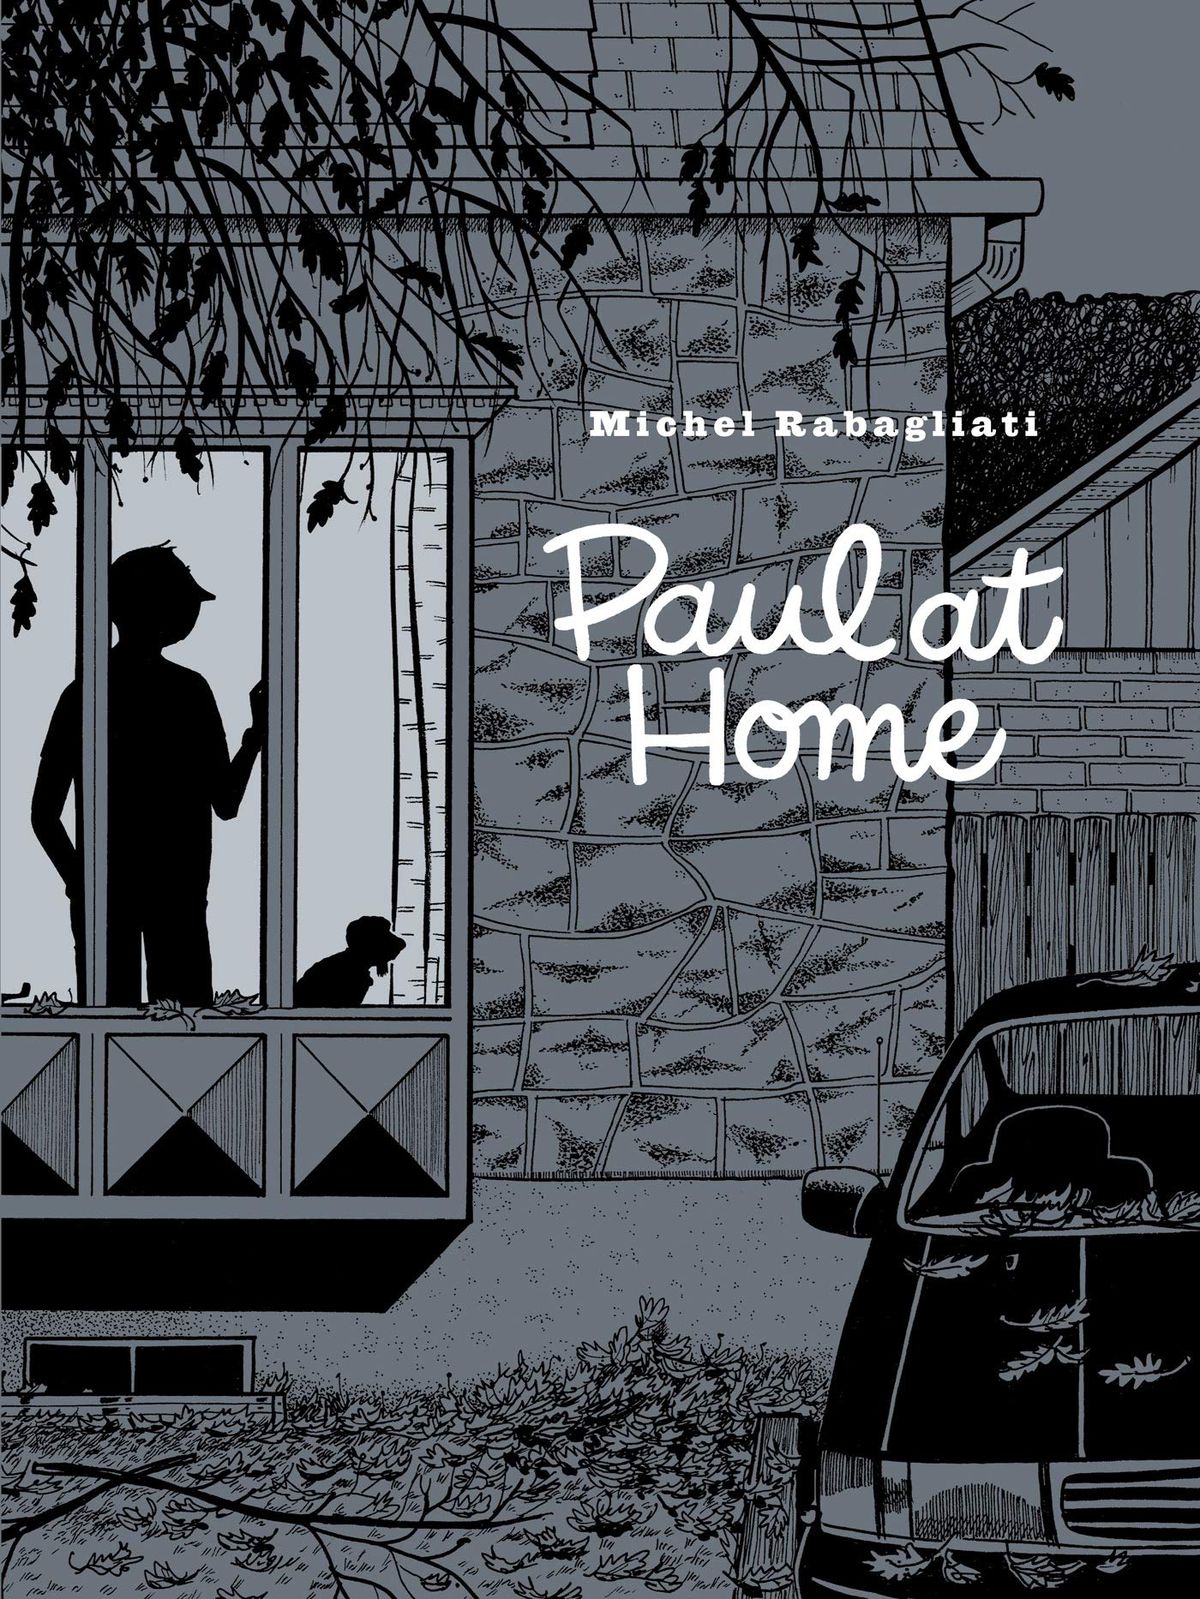 Paul stands silhouetted in the window of his home on the cover of Paul at Home (2020).